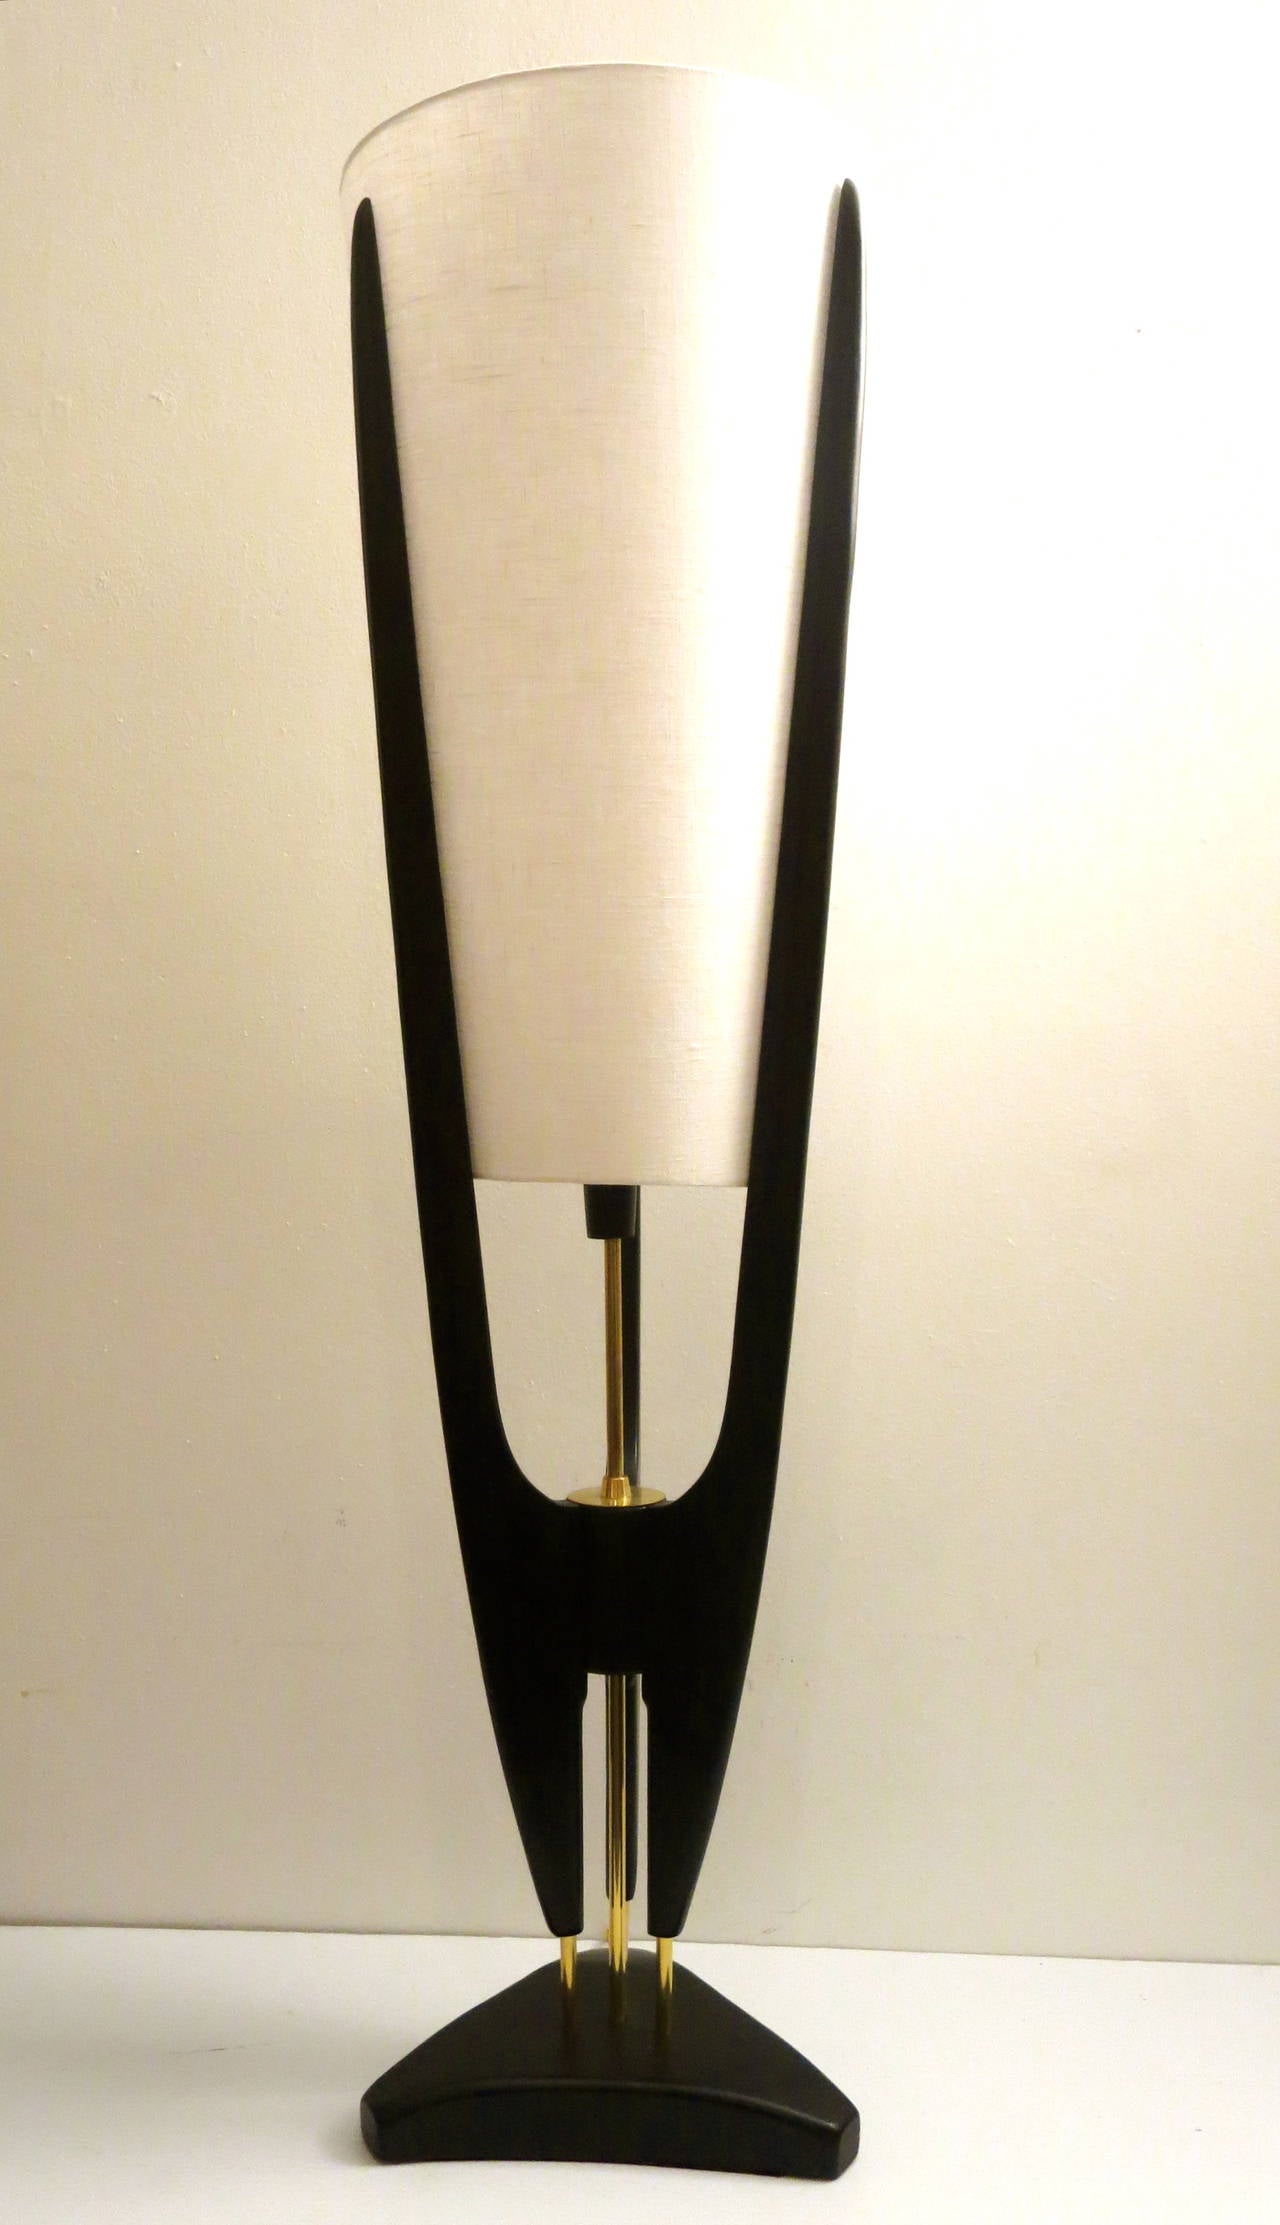 Tall elegant and unique table lamp Iconic Mid-Century American lamp, in ebonized walnut finish, new lamp shade and brass fittings totally restored new gold silk cord, pull off/on switch in the middle, new lamp shade remake, one of a kind striking